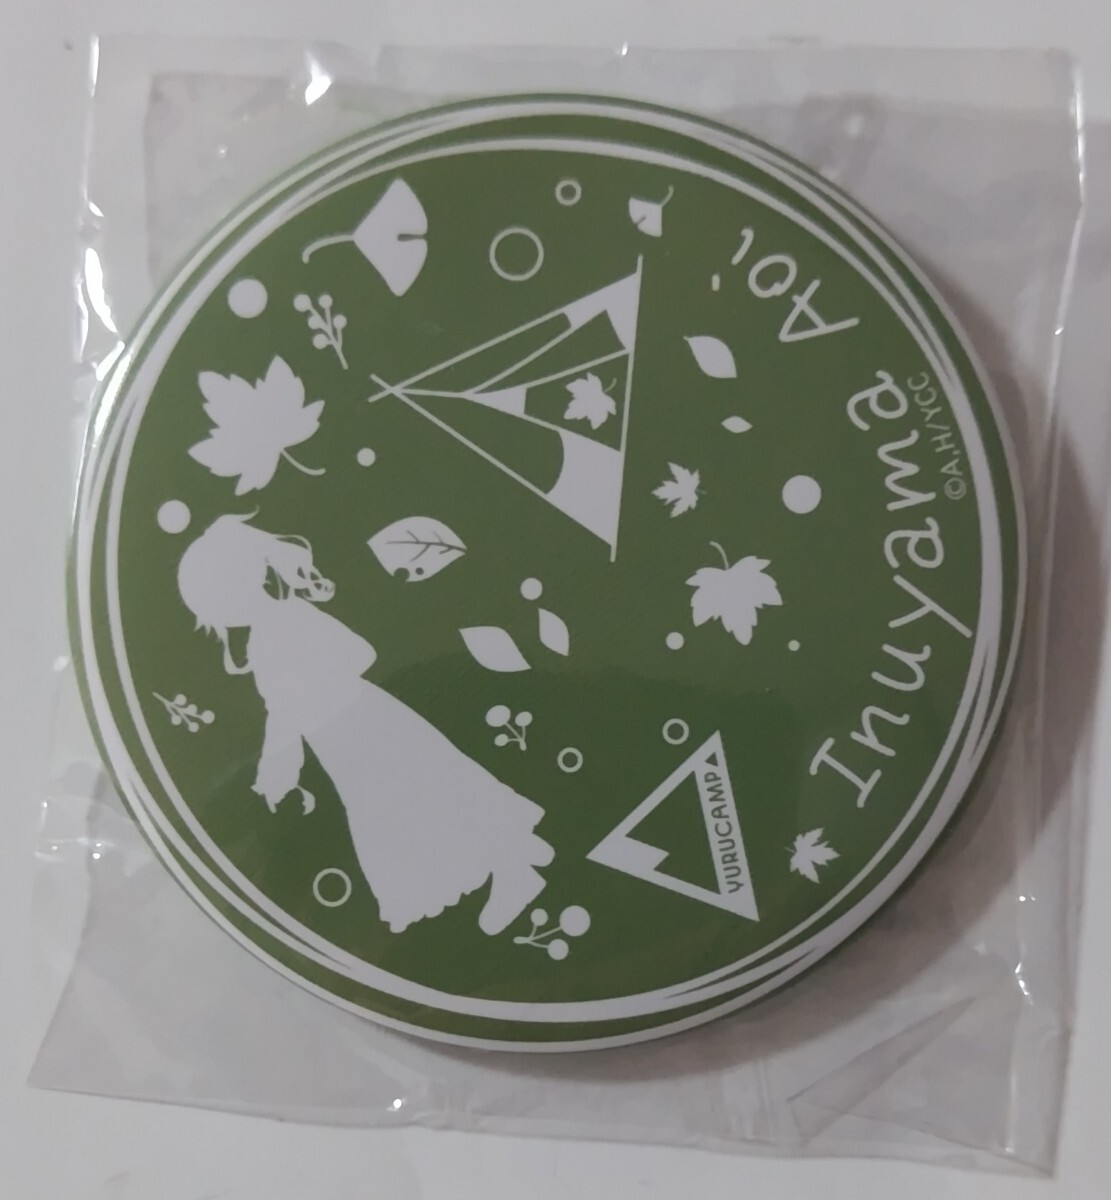 yu. can ^ Dream can badge maple & pond smelt art * can badge * dog mountain .../ Silhouette 